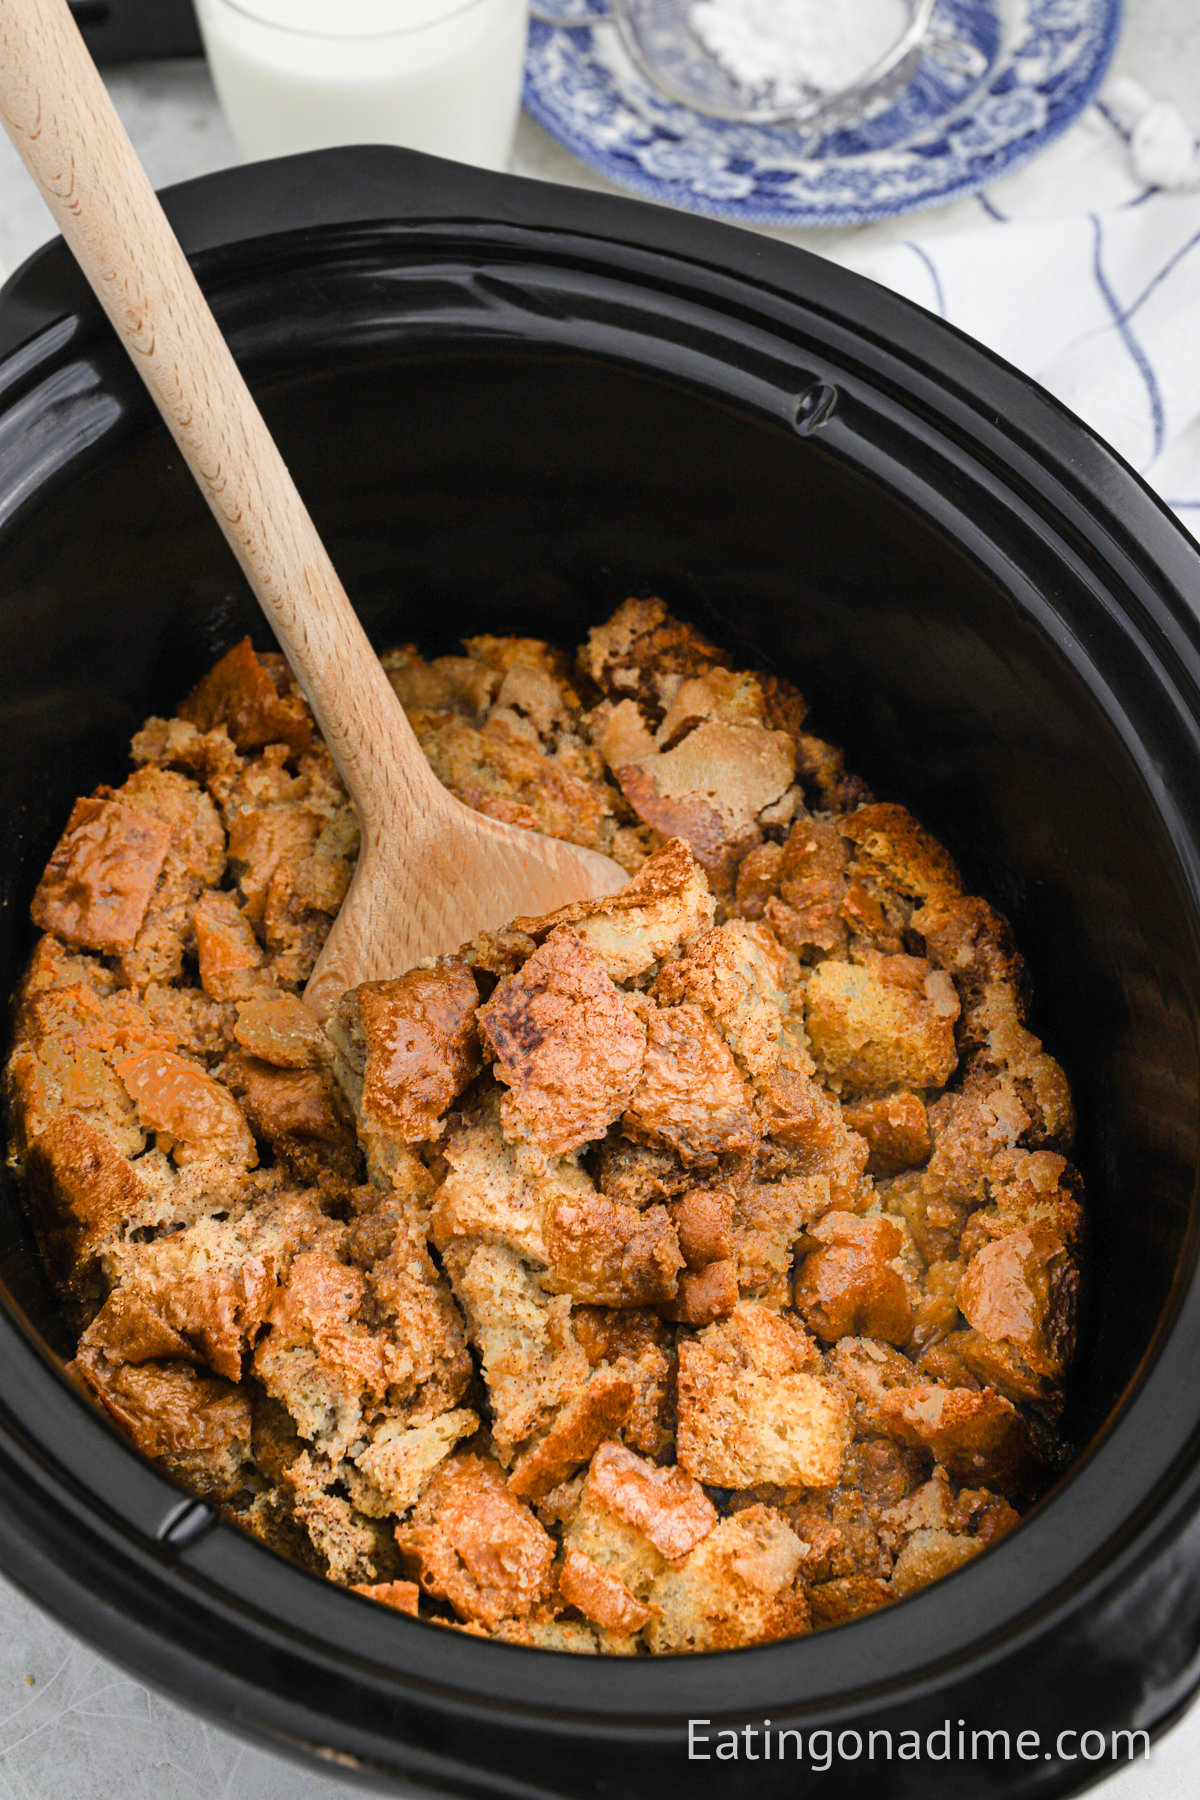 Slow Cooker French Toast Casserole - The Recipe Pot